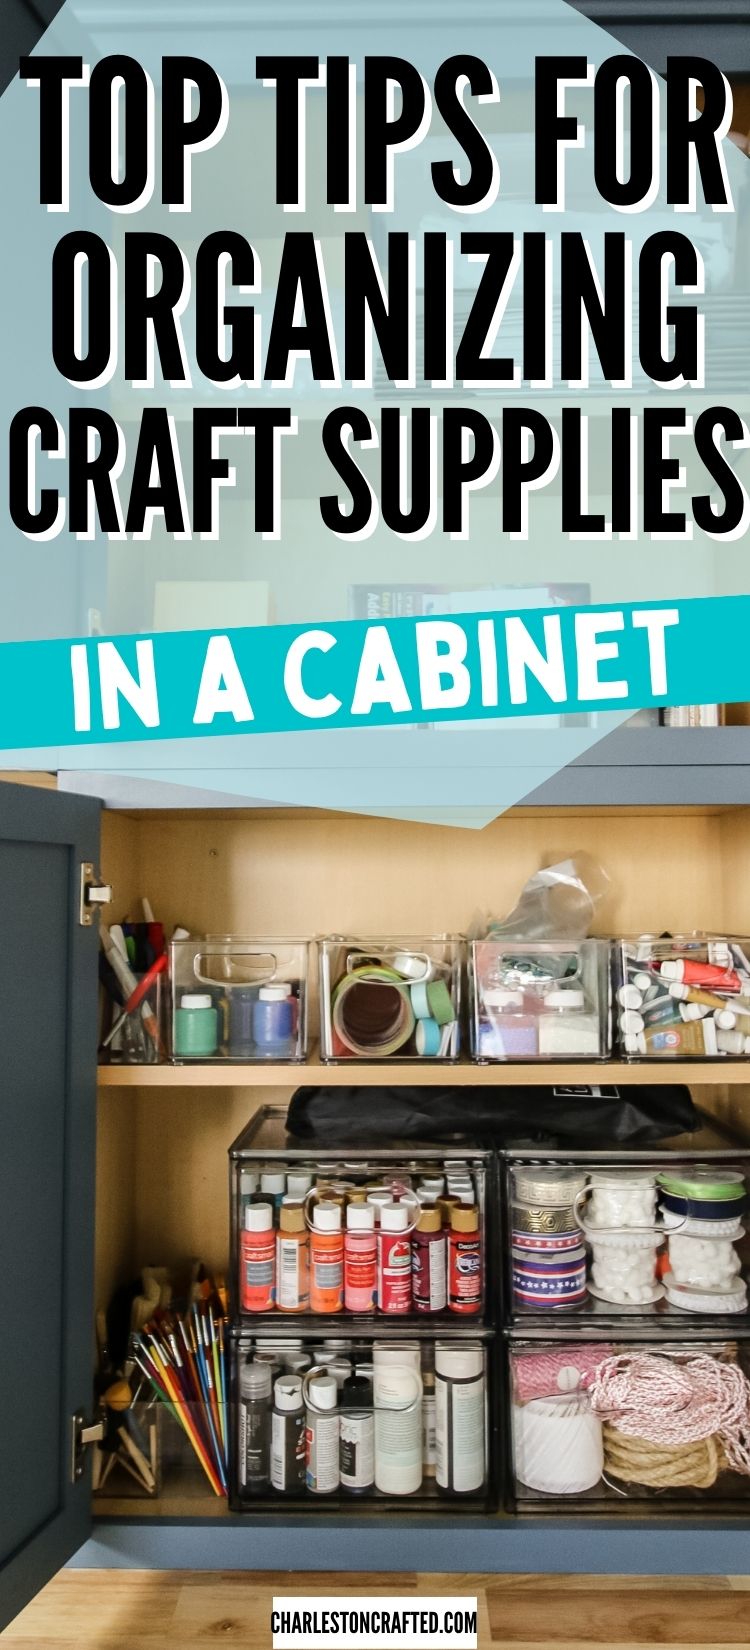 How to make an art supply organizer // Woodworking